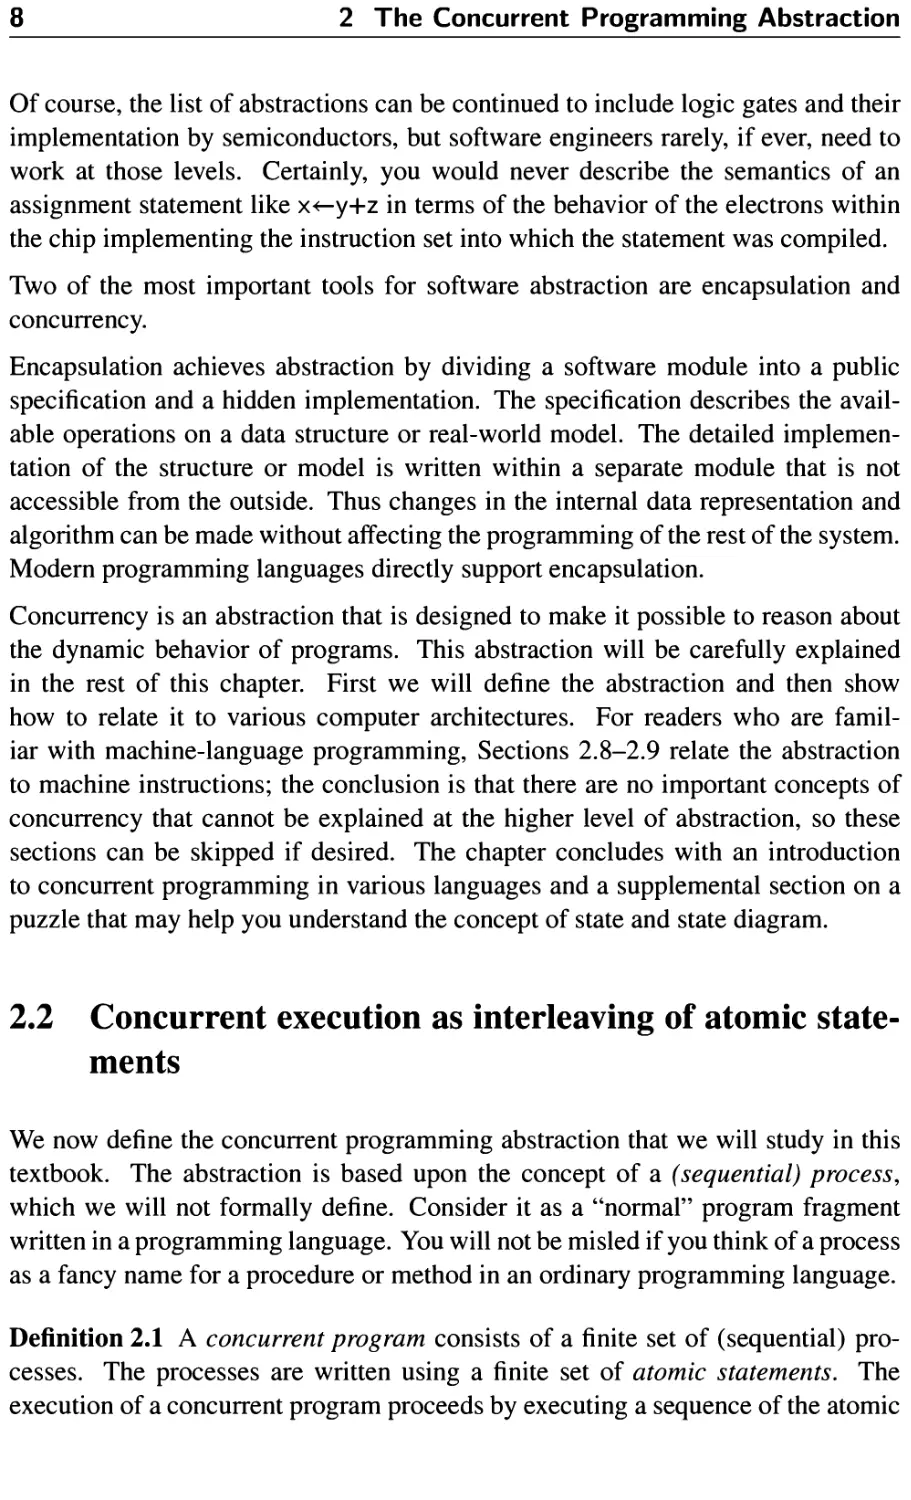 2.2 Concurrent execution as interleaving of atomic statements